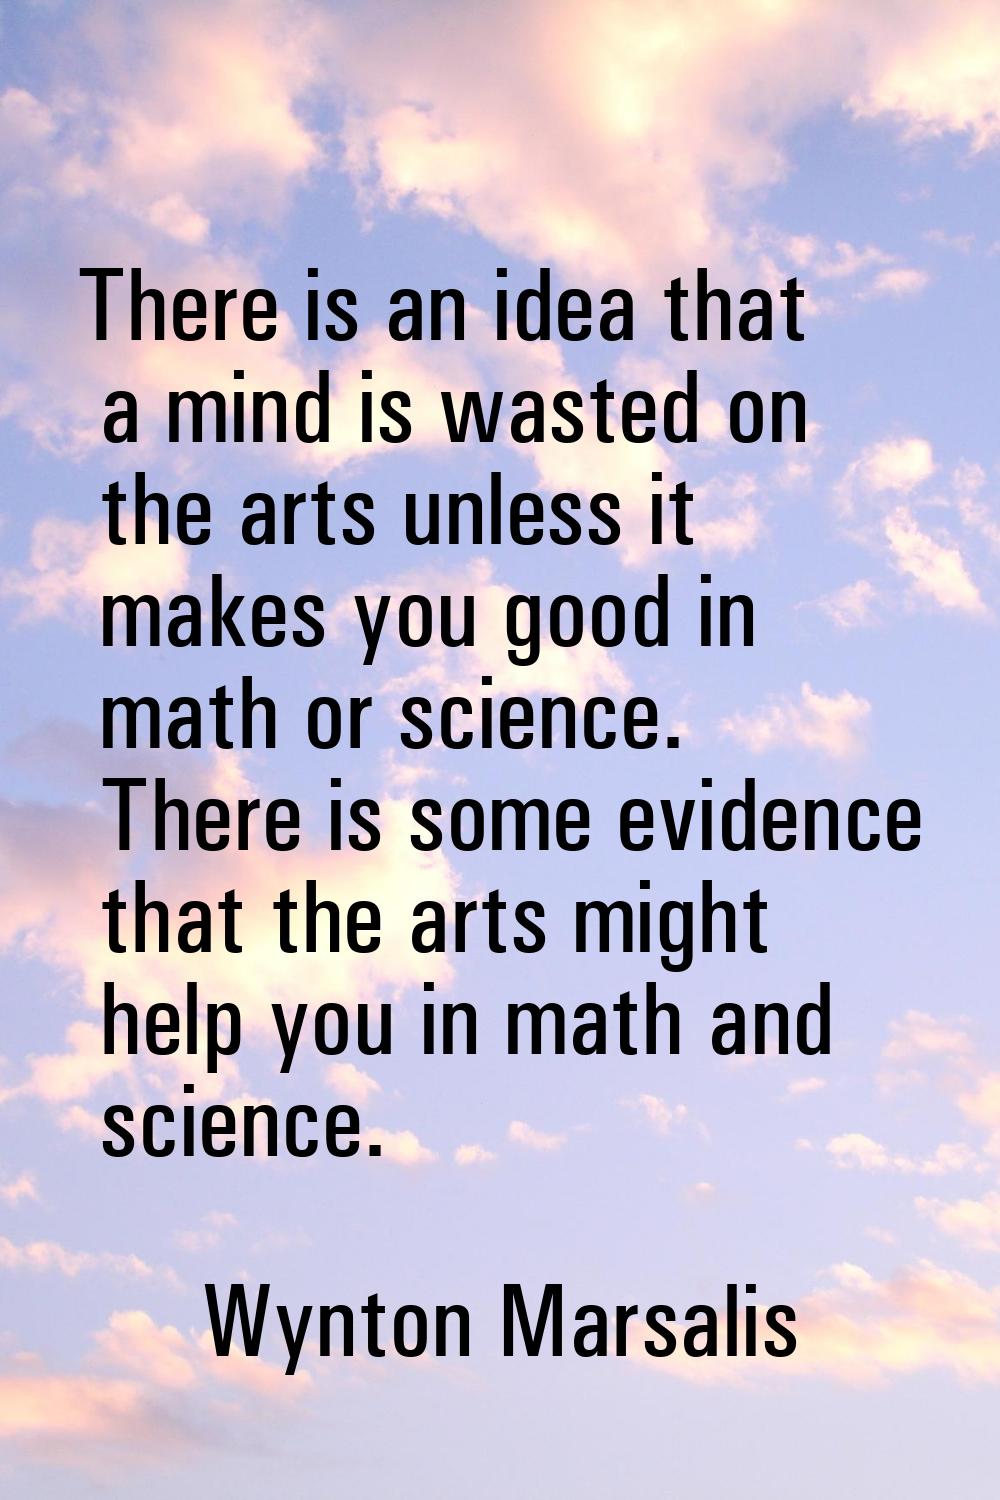 There is an idea that a mind is wasted on the arts unless it makes you good in math or science. The